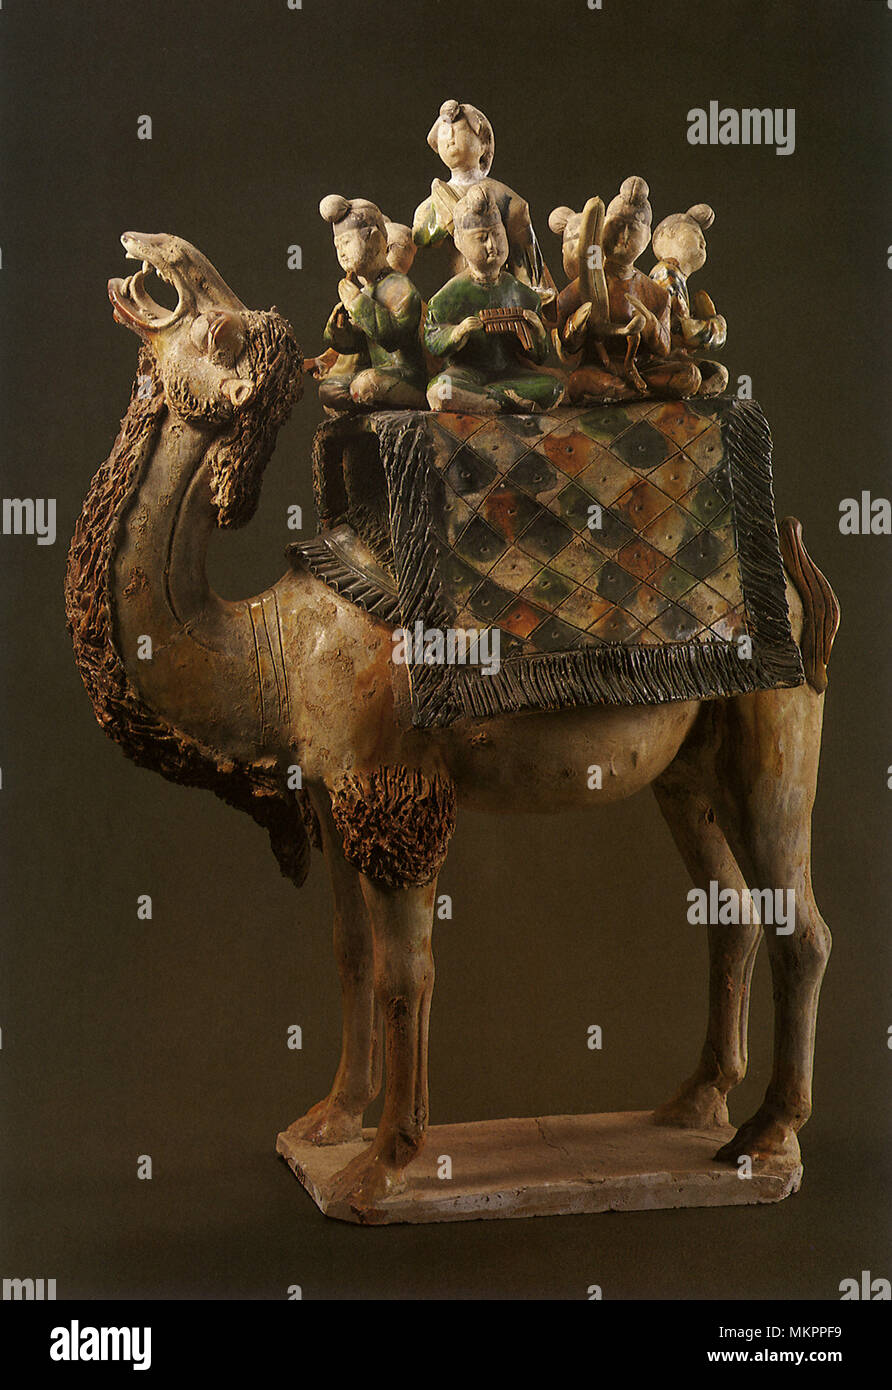 Statuette of Musicians Mounted on a Camel Stock Photo